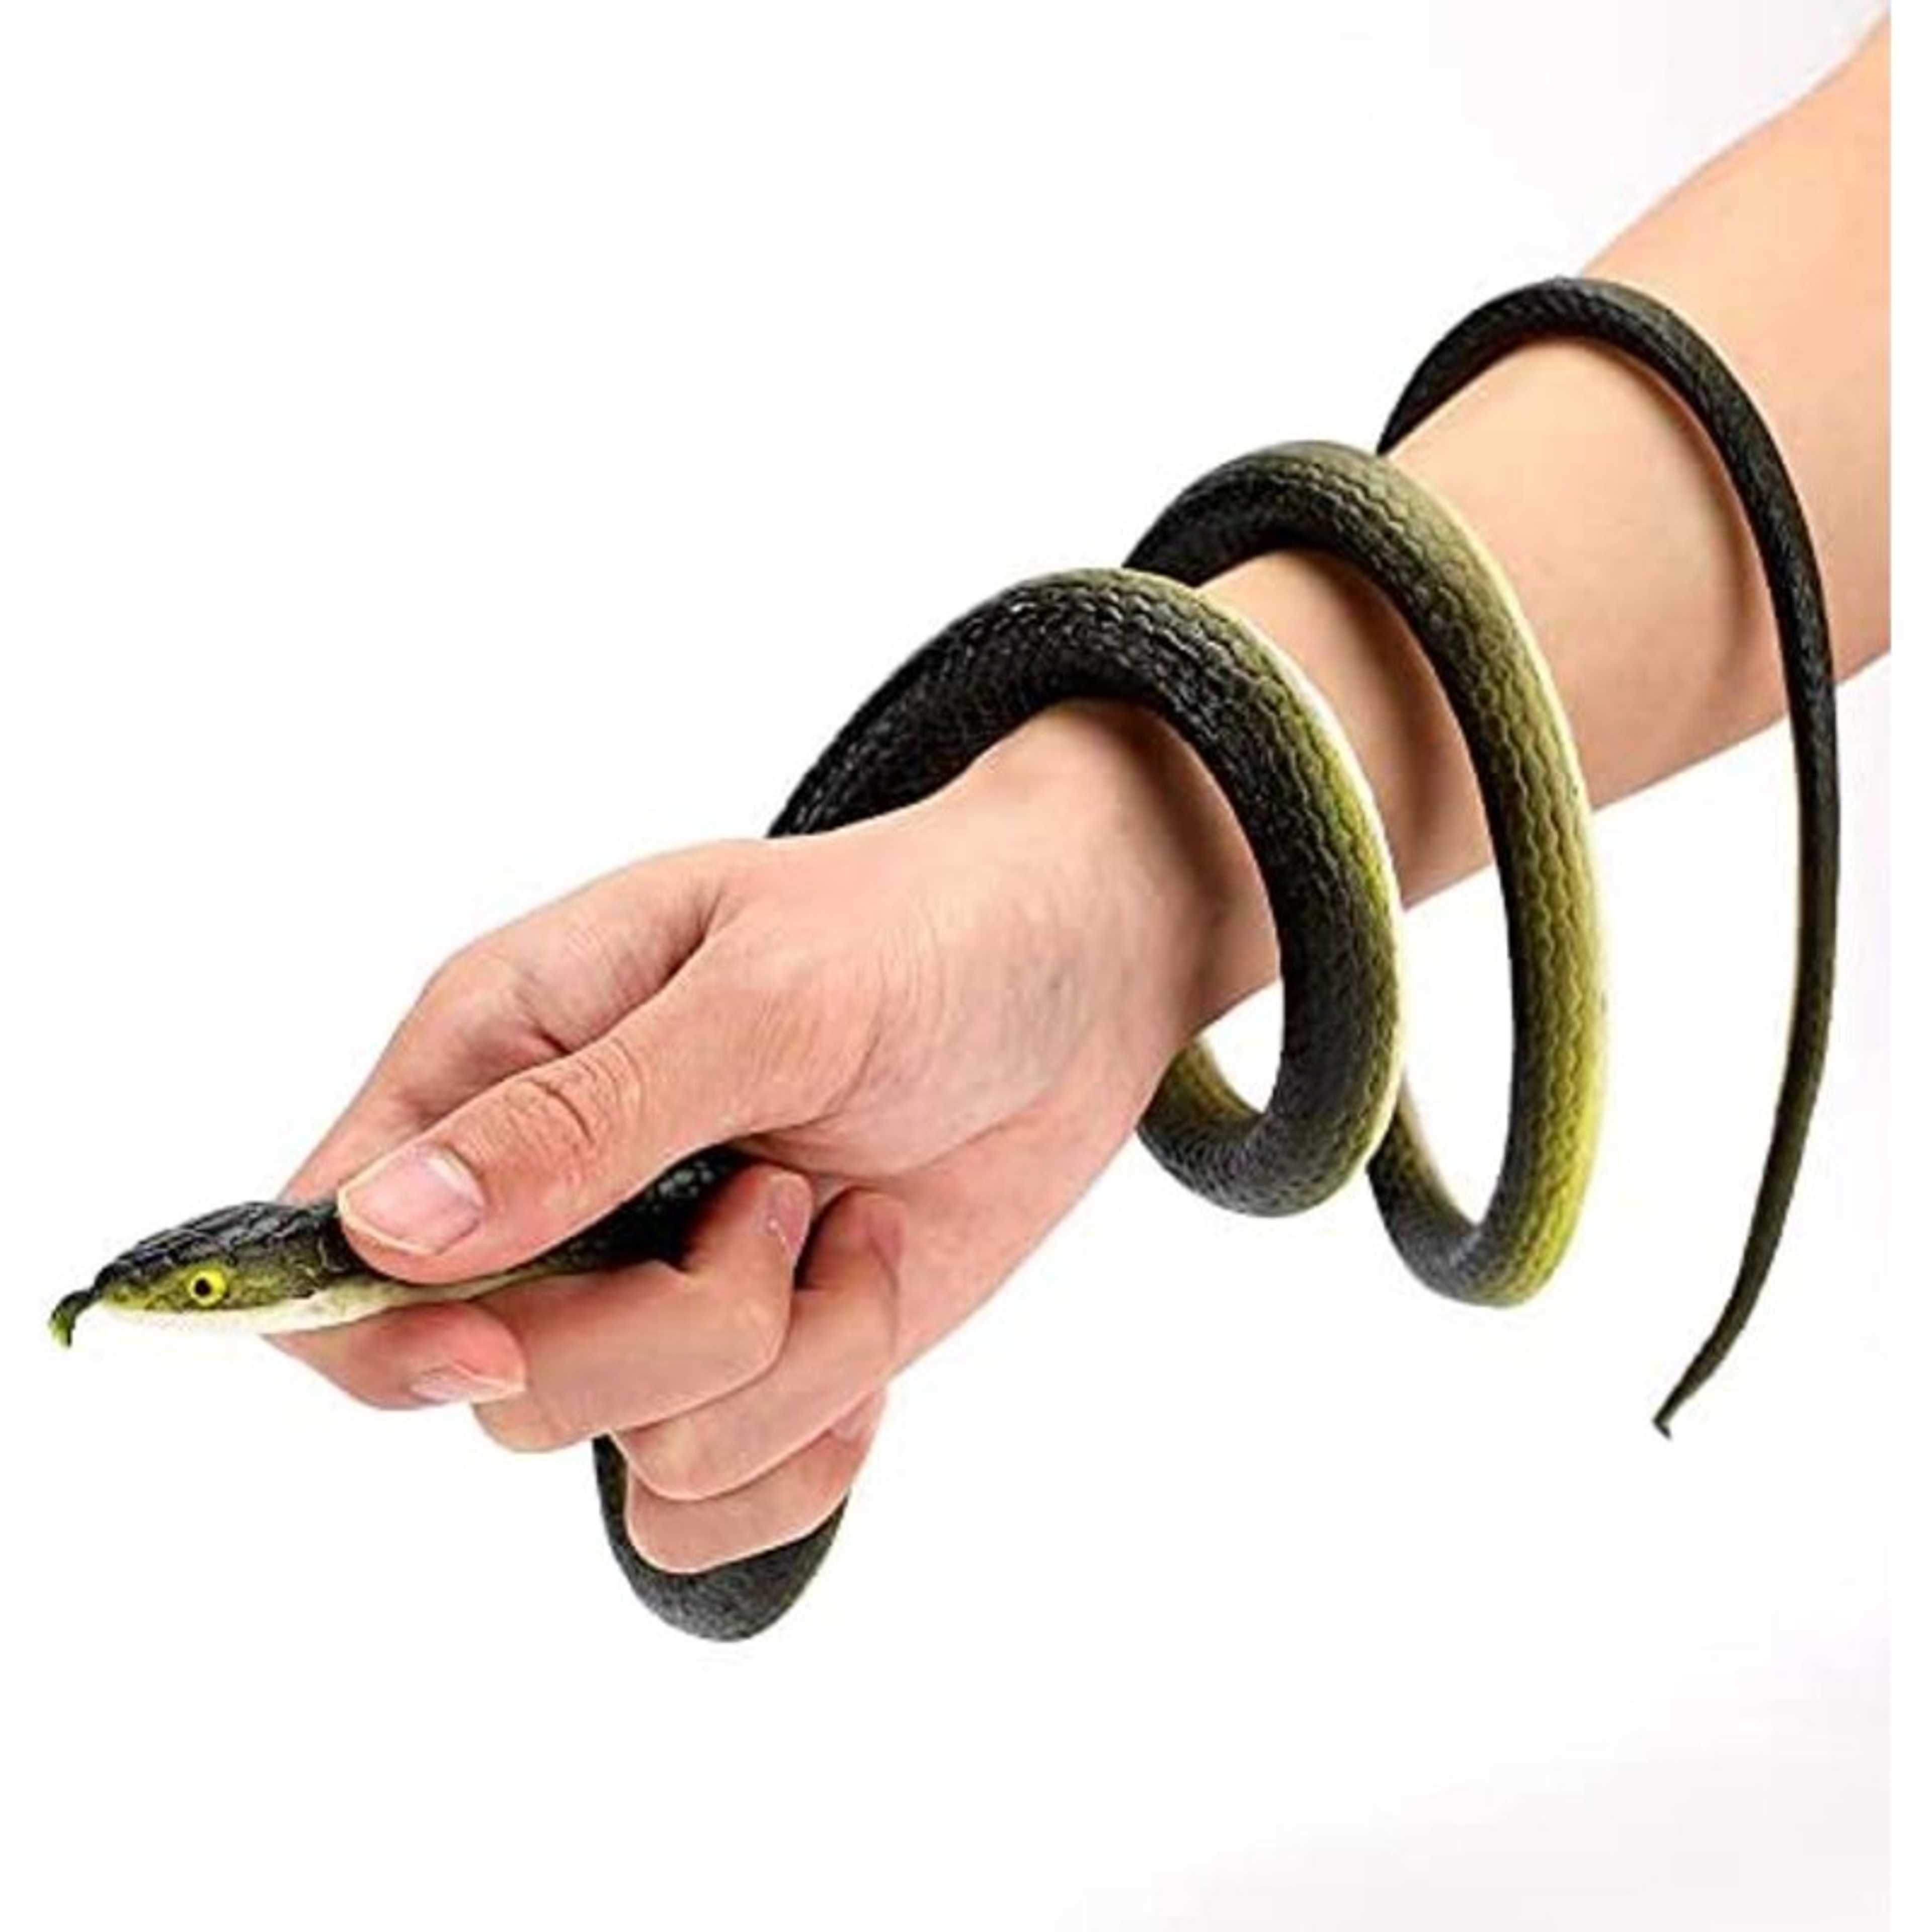 Artificial Rubber Snake 25-30 Lenght toy